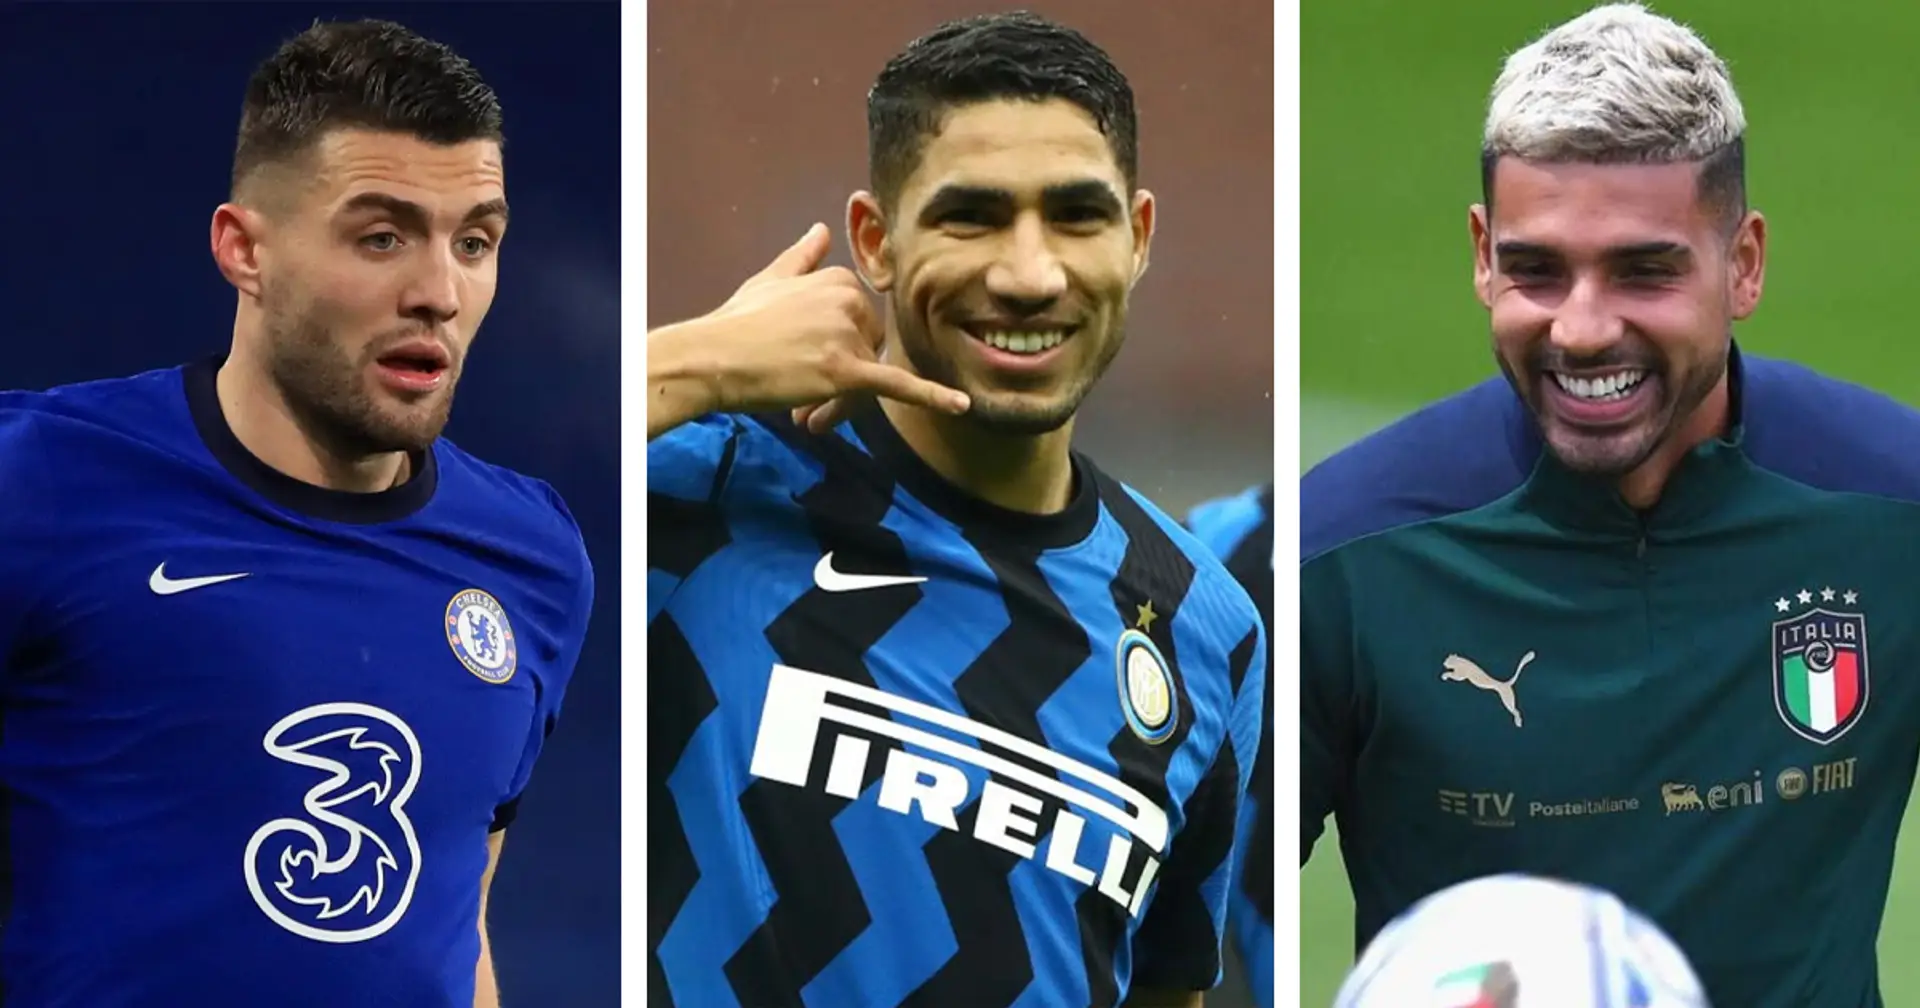 Chelsea reportedly make improved bid for Hakimi, Emerson and 3 more players could be part of deal (reliability: 3 stars)